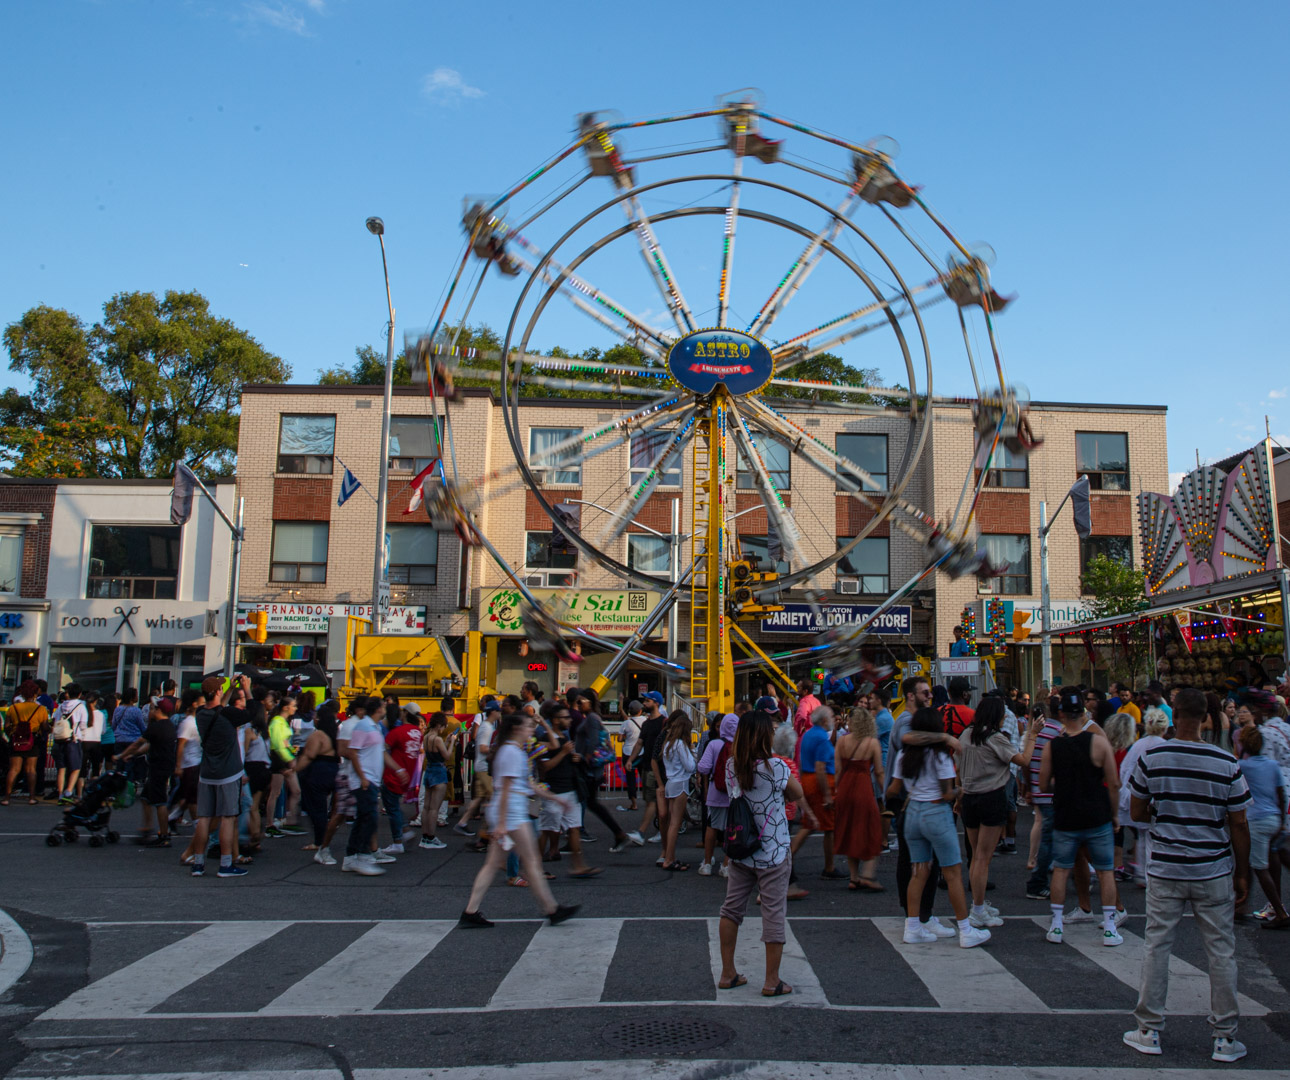 Sunday Evening at the Taste of The Danforth